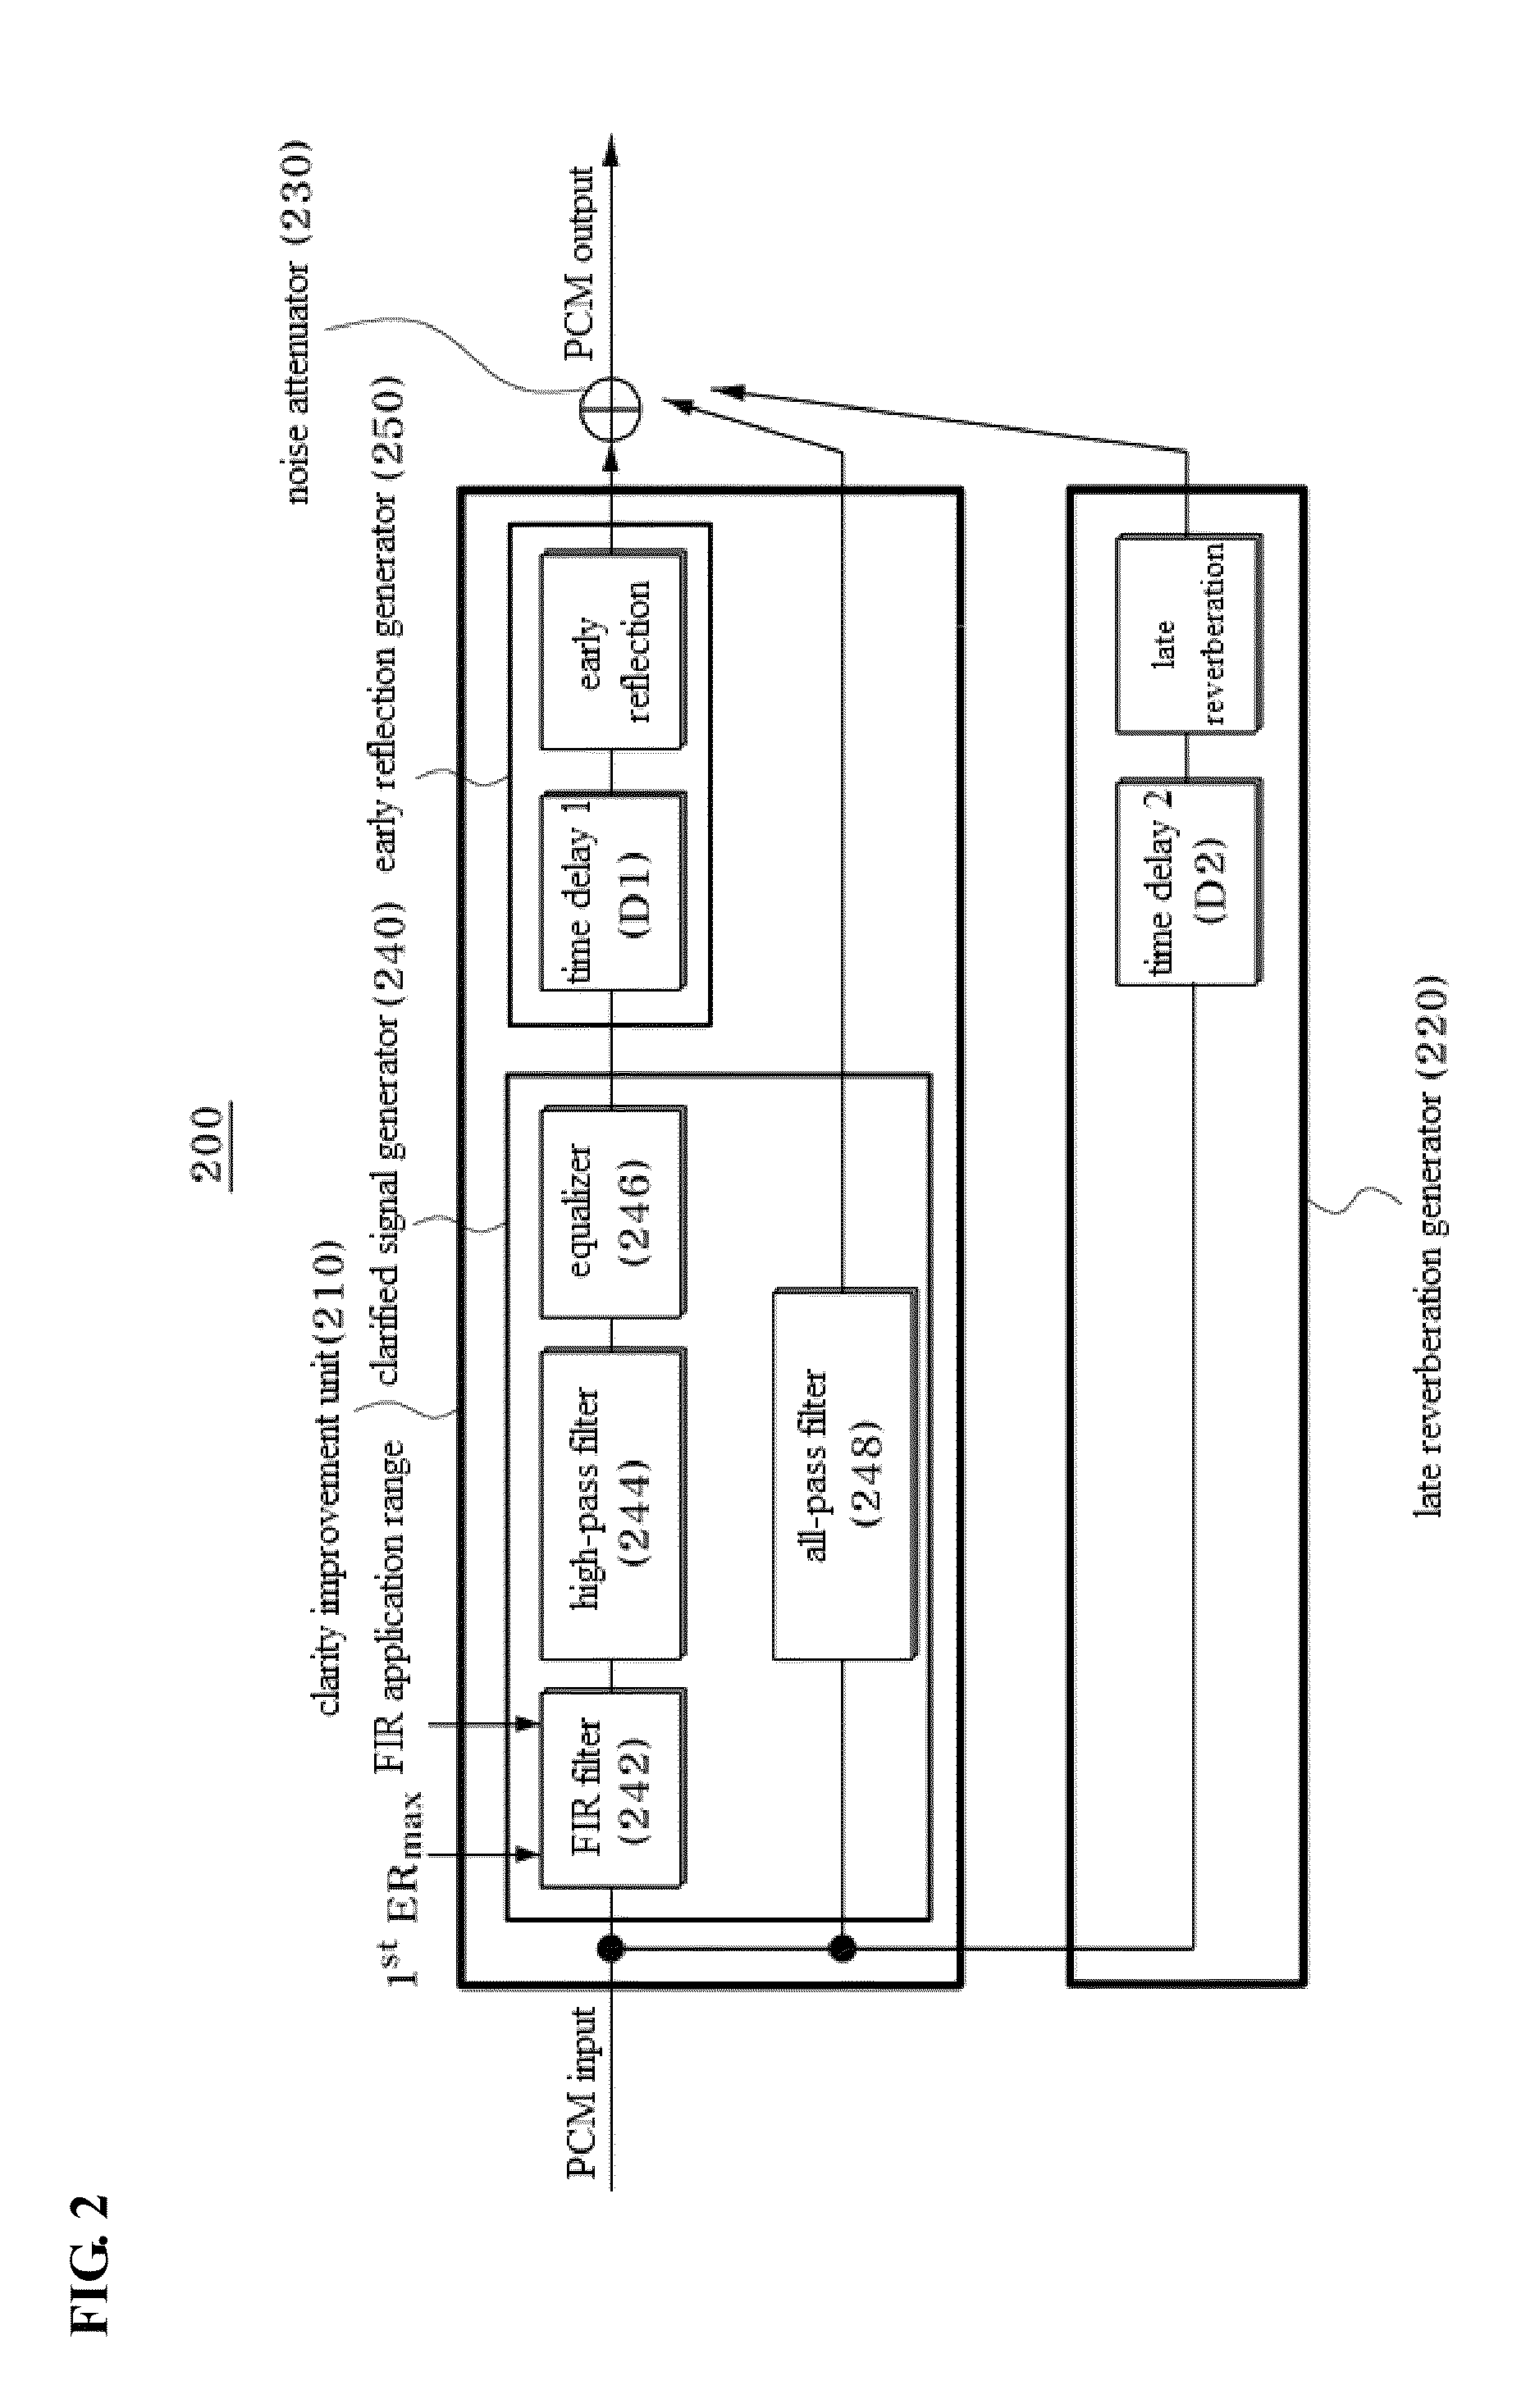 Apparatus and method for reducing digital noise of audio signal